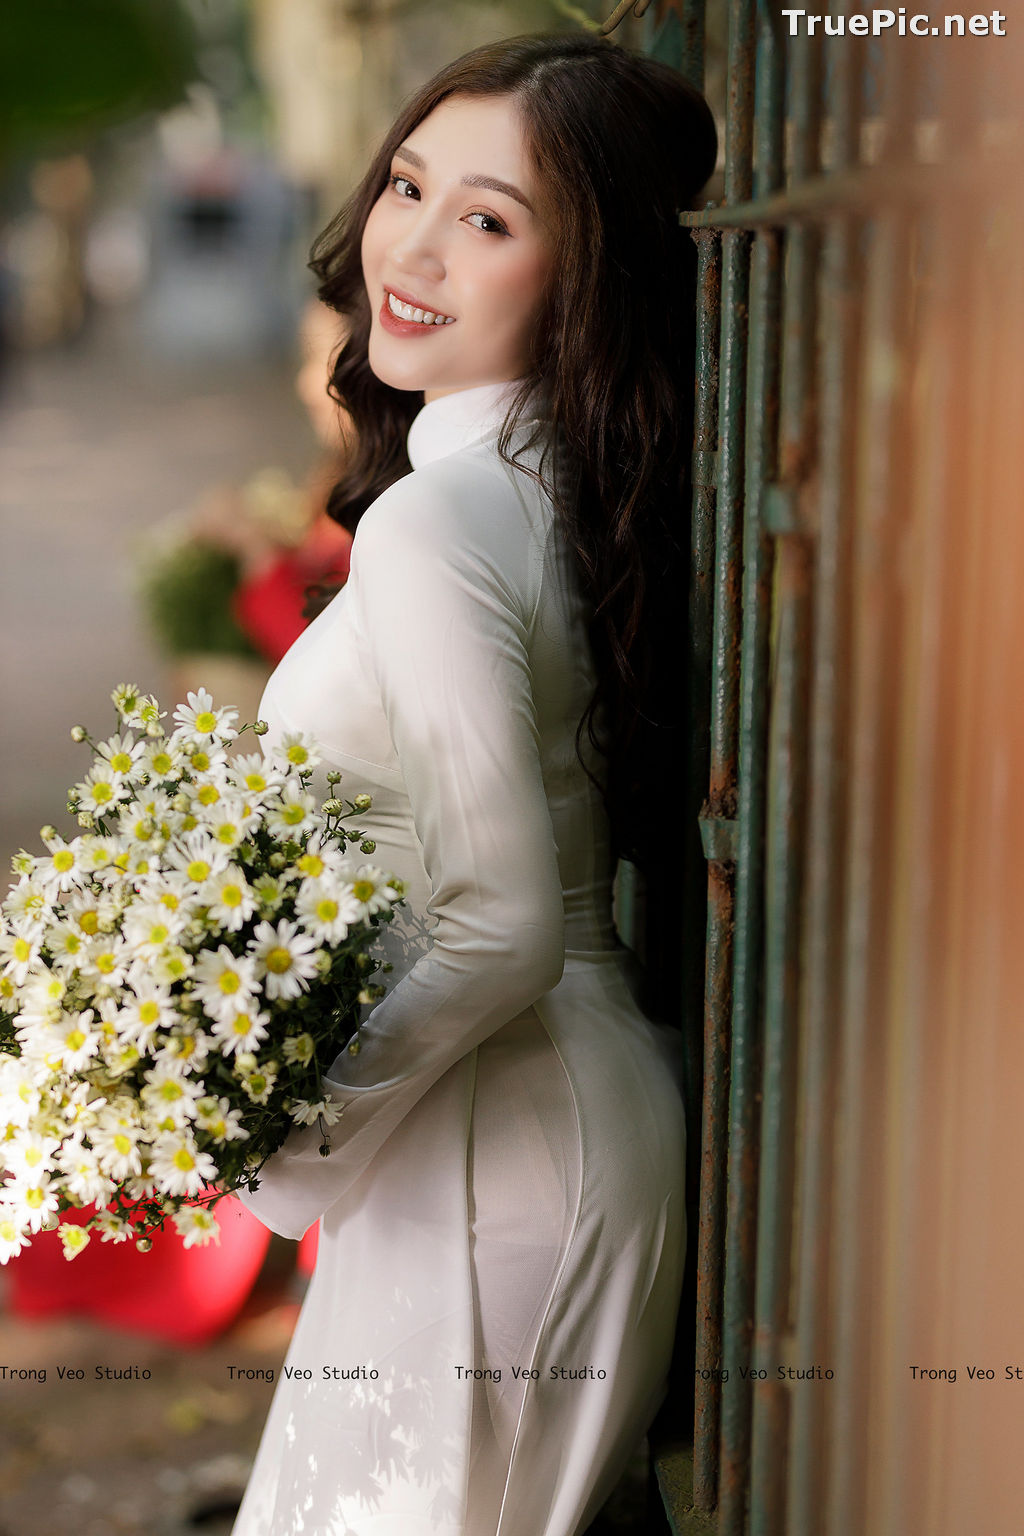 Image The Beauty of Vietnamese Girls with Traditional Dress (Ao Dai) #1 - TruePic.net - Picture-13